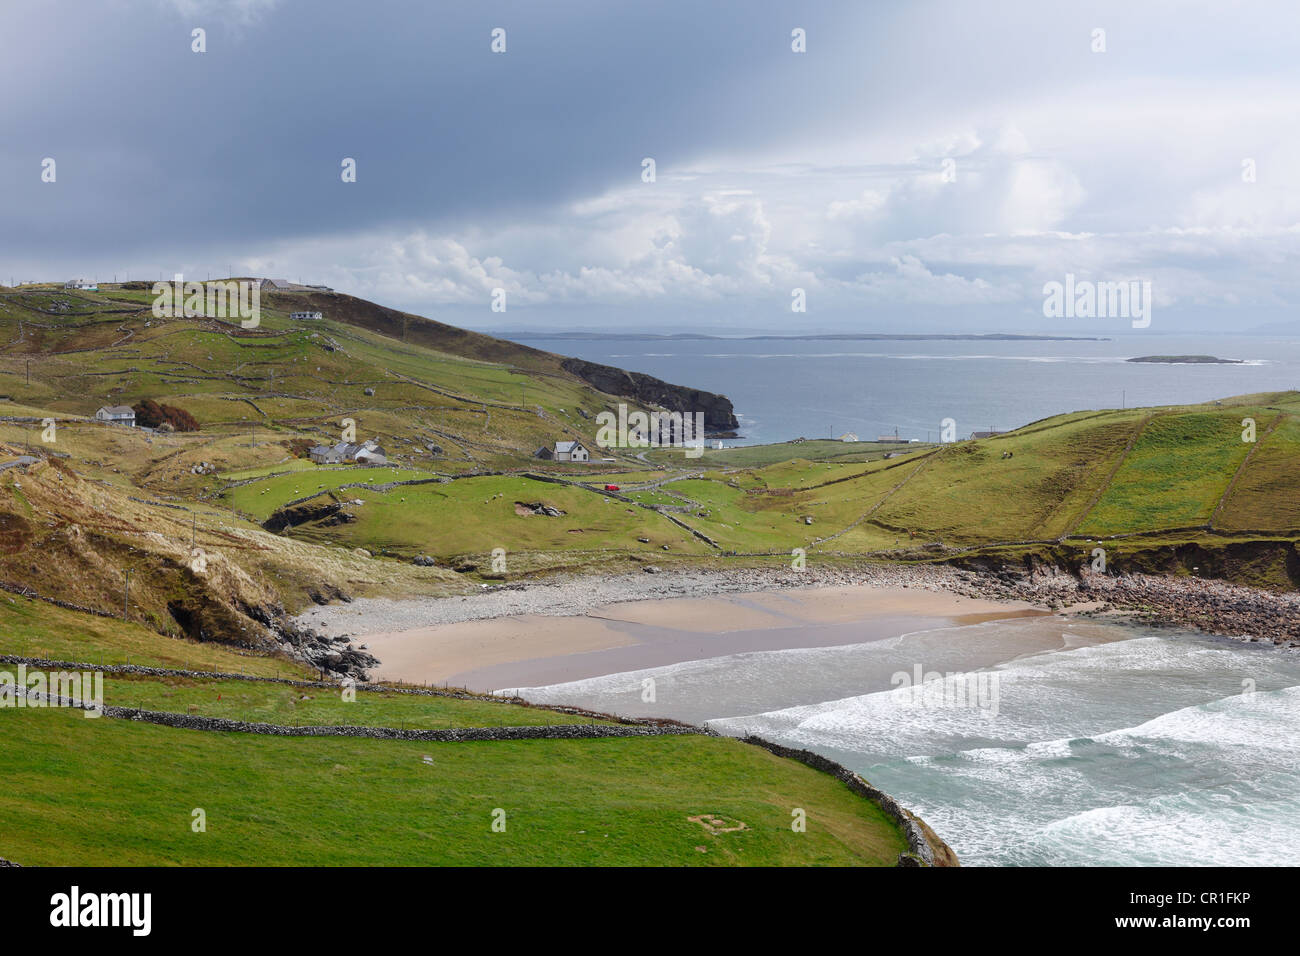 Muckross Head, Donegal Bay, County Donegal, Ireland, Europe Stock Photo